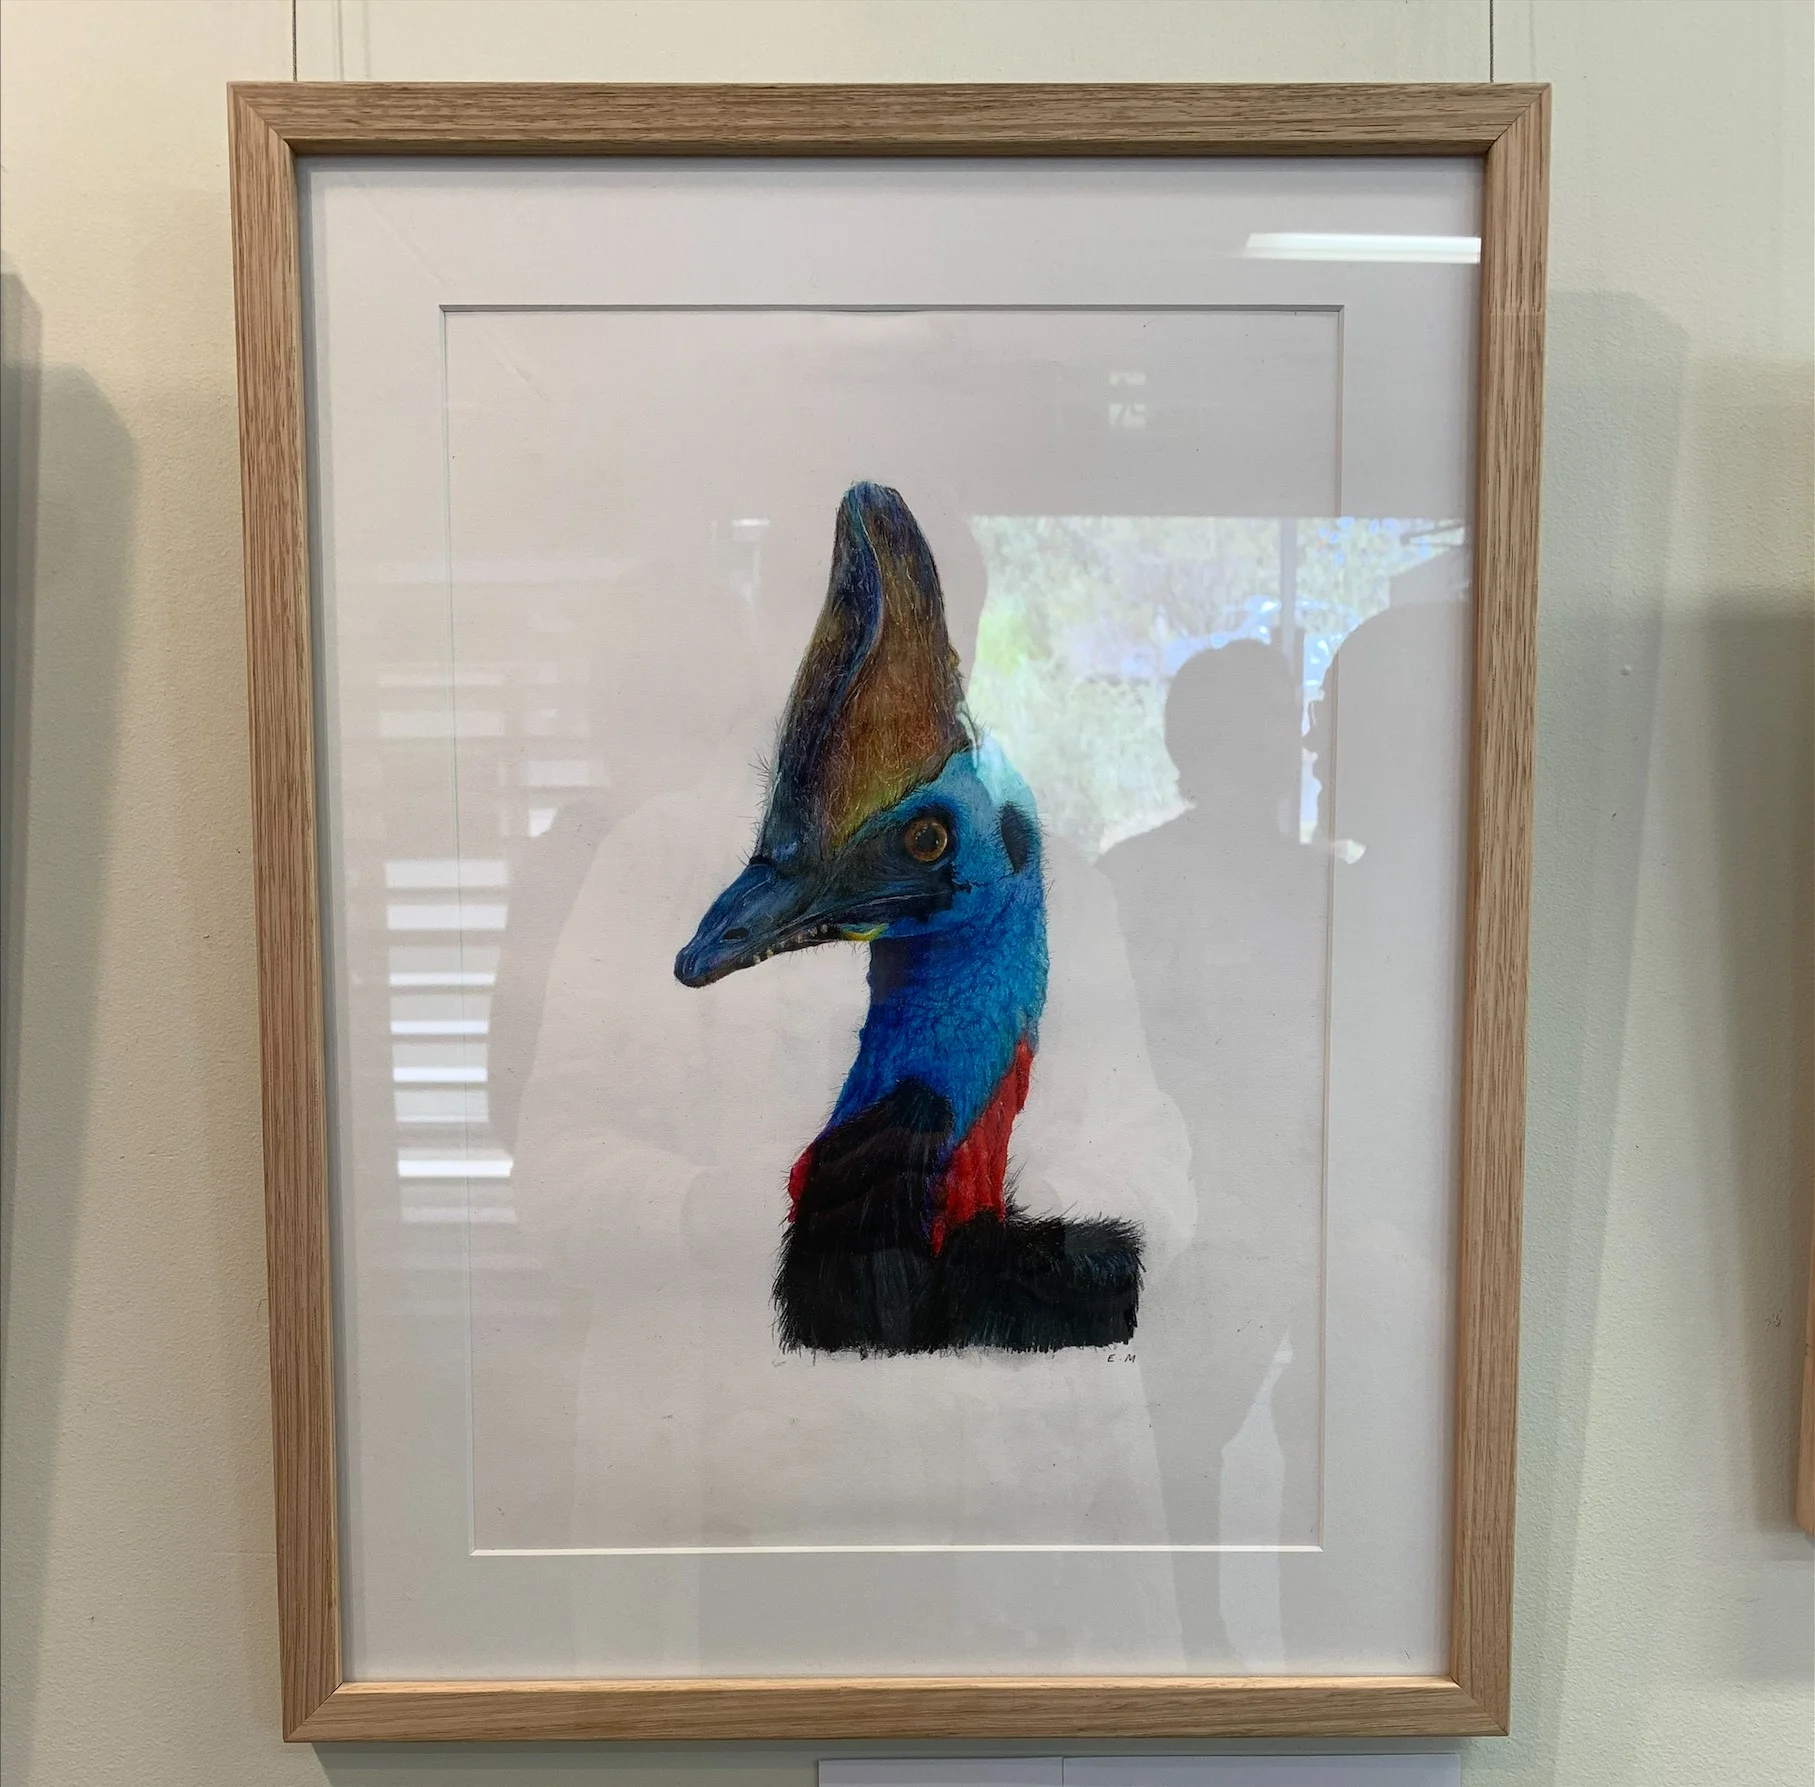 Under 18s Threatened Species winner “The Bold and Beautiful Southern Cassowary” by Erin M